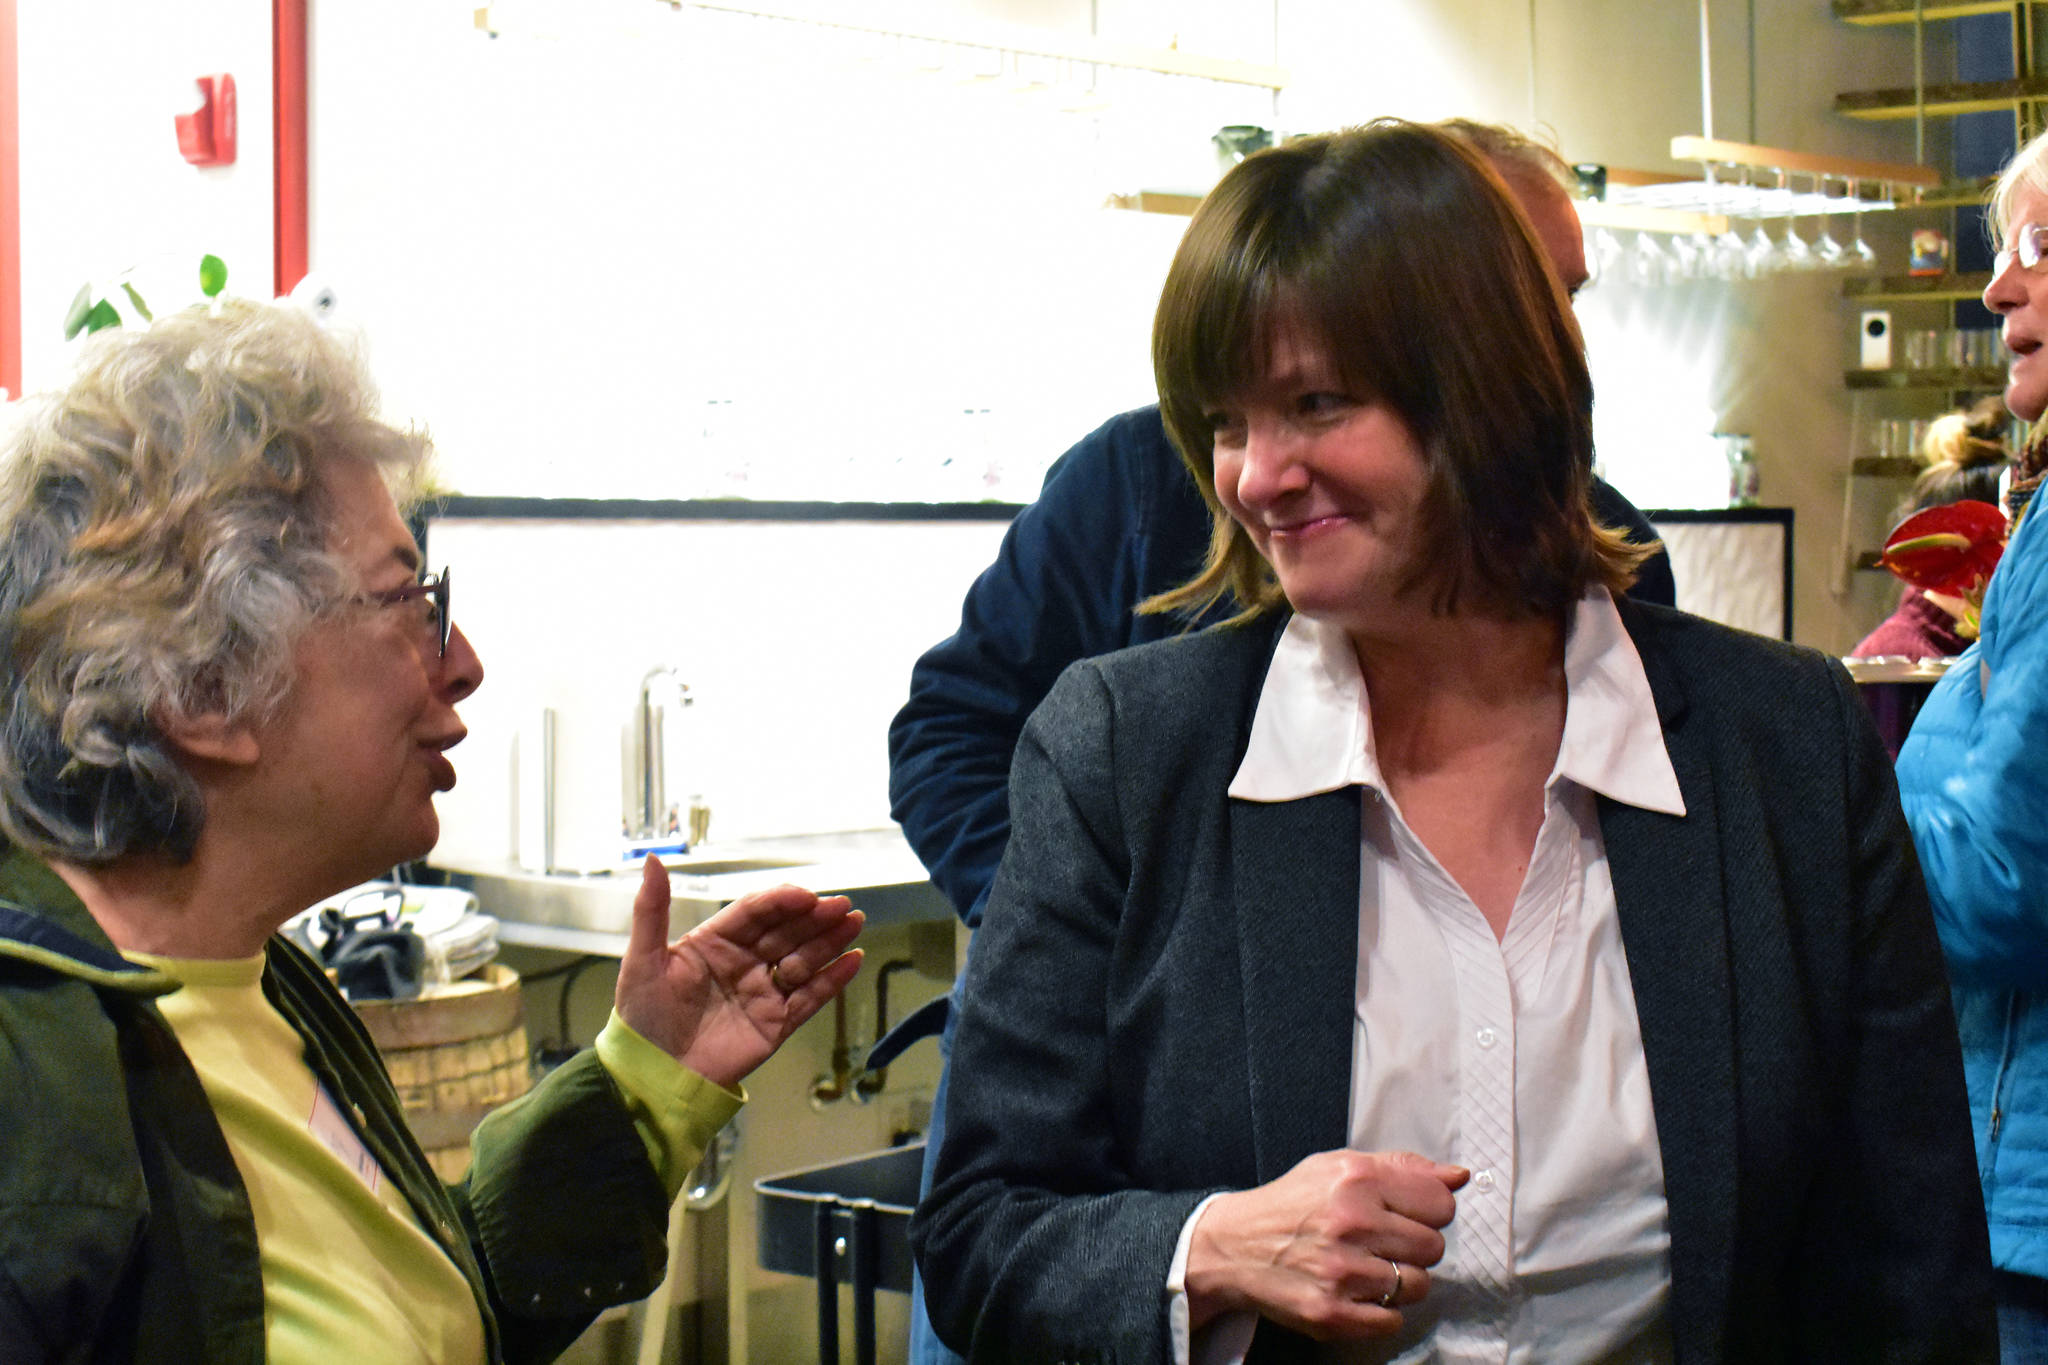 Congressional candidate Alyse Galvin, an Independent seeking to unseat Rep. Don Young, R-Alaska, meets with Juneauites at the Almalga Distillery on Saturday, Nov. 23, 2019. (Peter Segall | Juneau Empire)